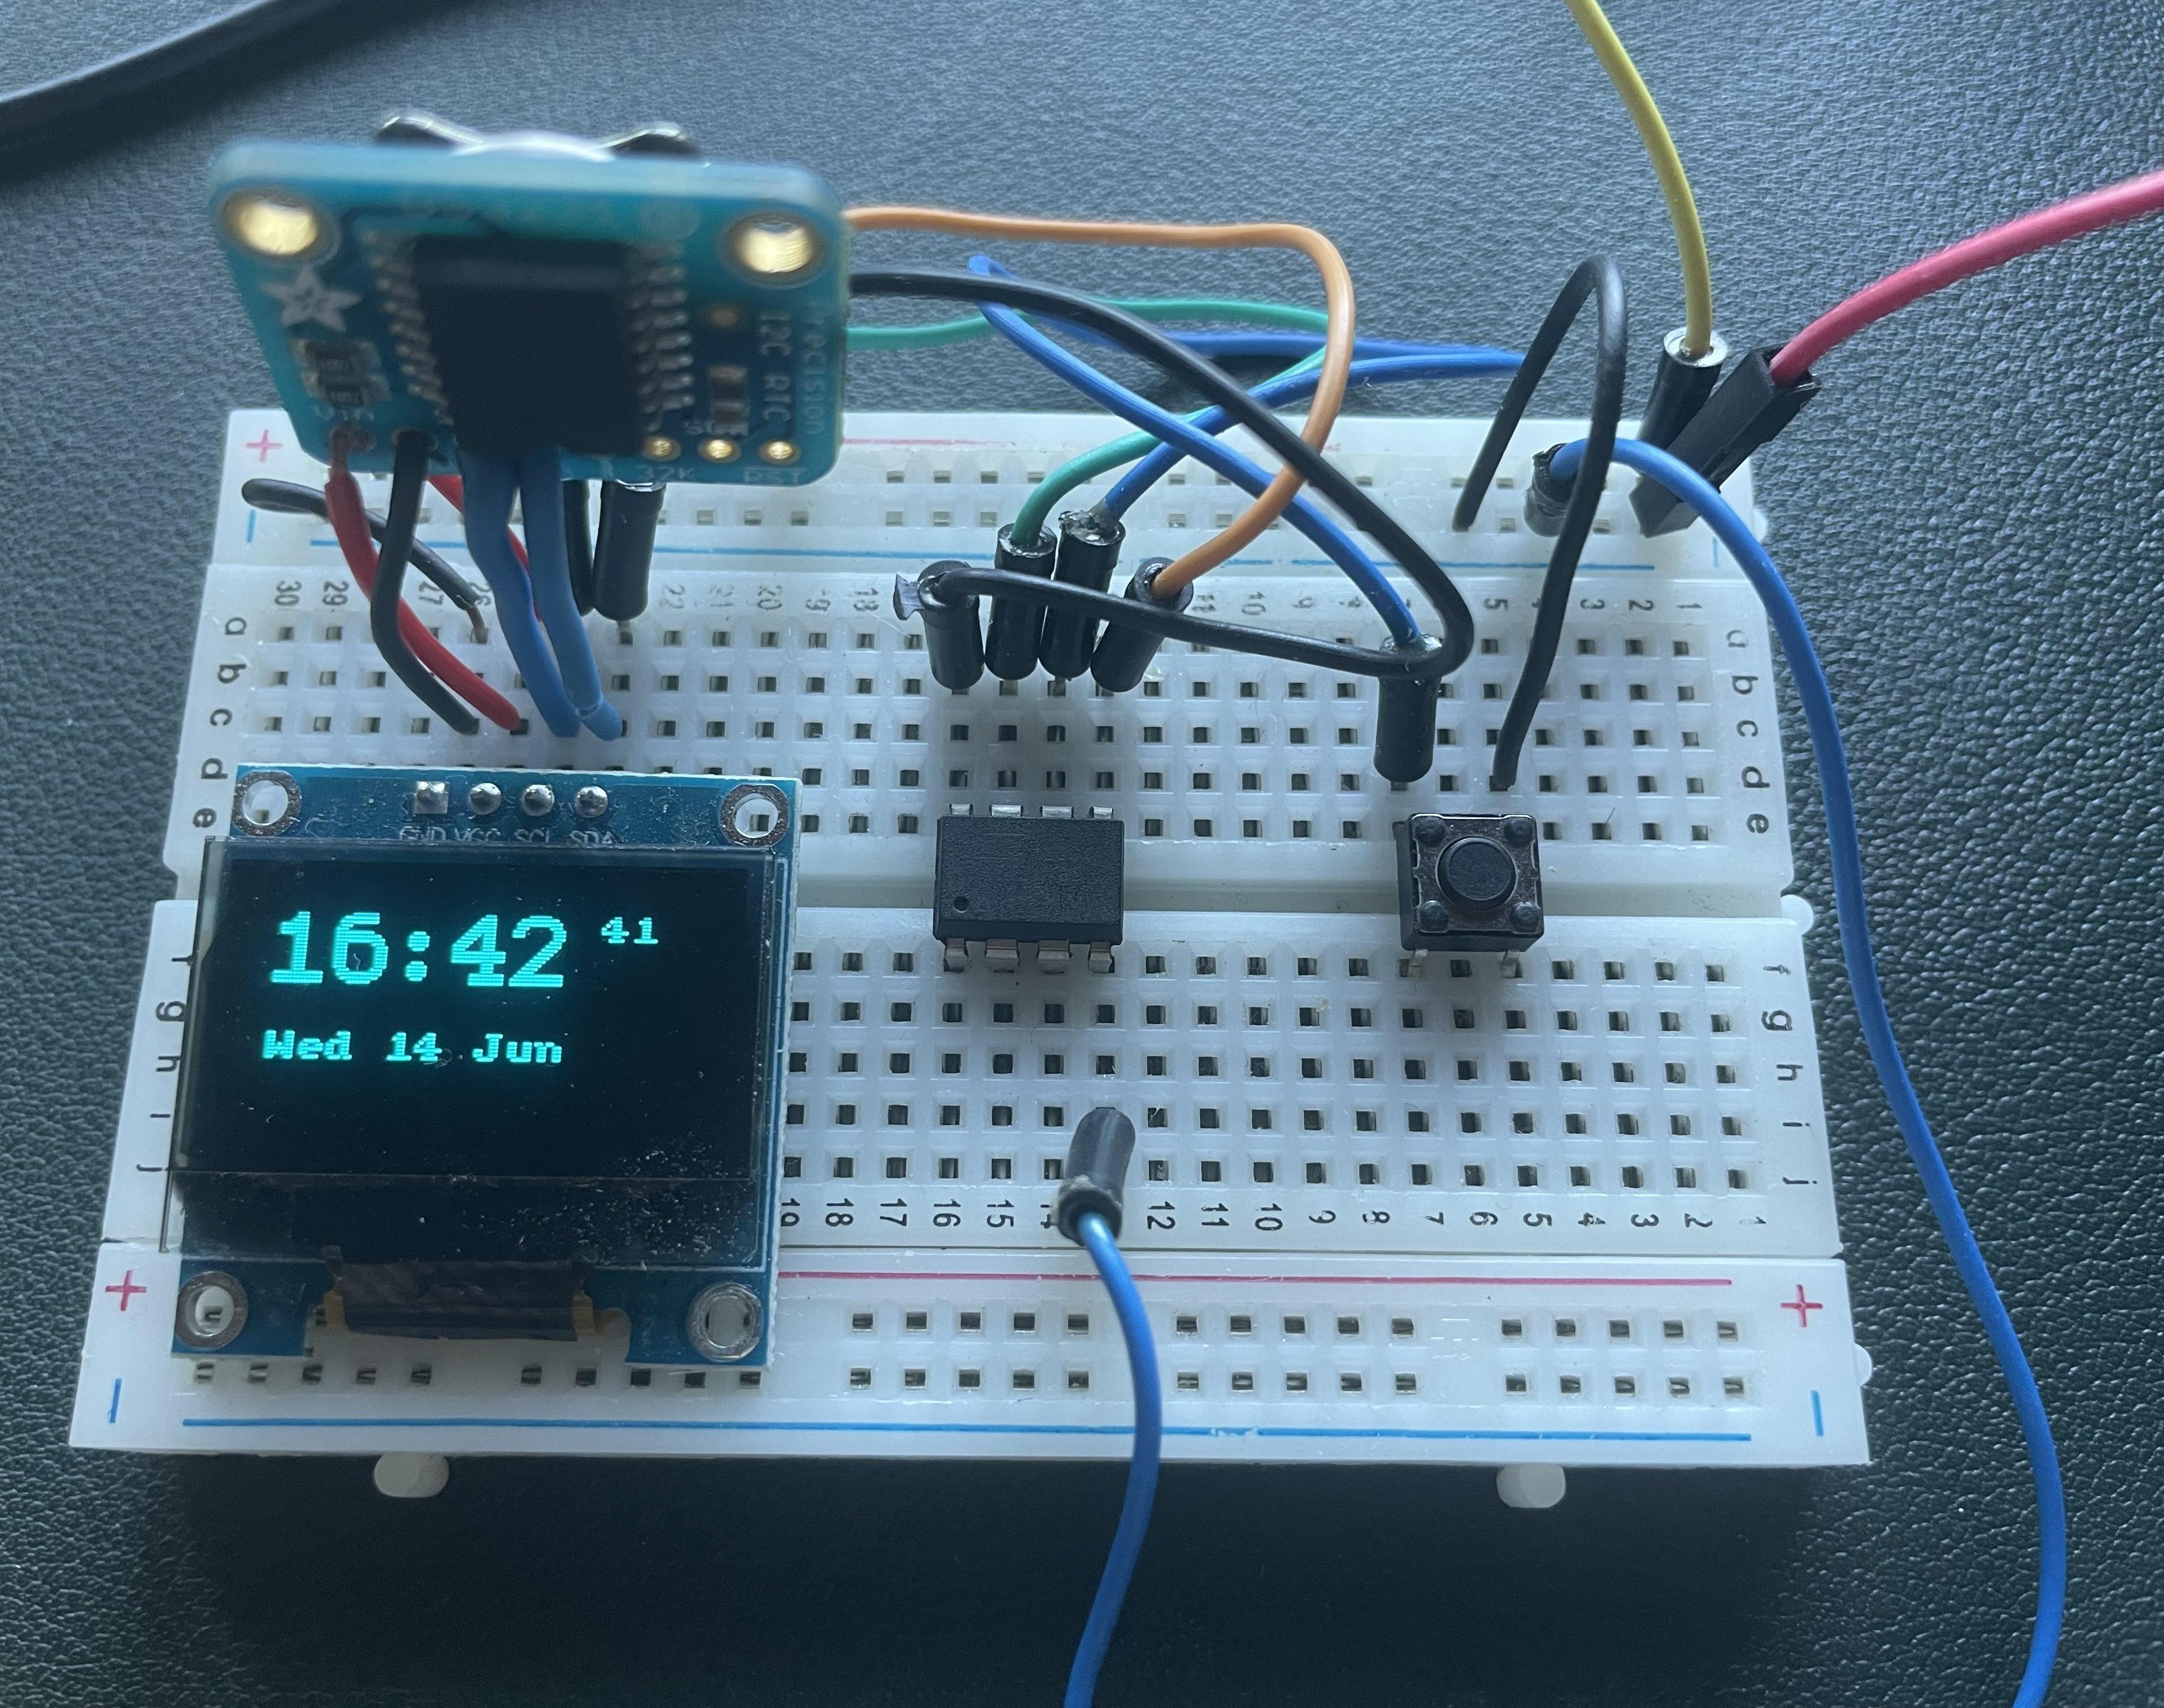 Breadboard Watch Using Attiny 85, DS 3231 Real Time Clock, a Push Button and the Arduino IDE